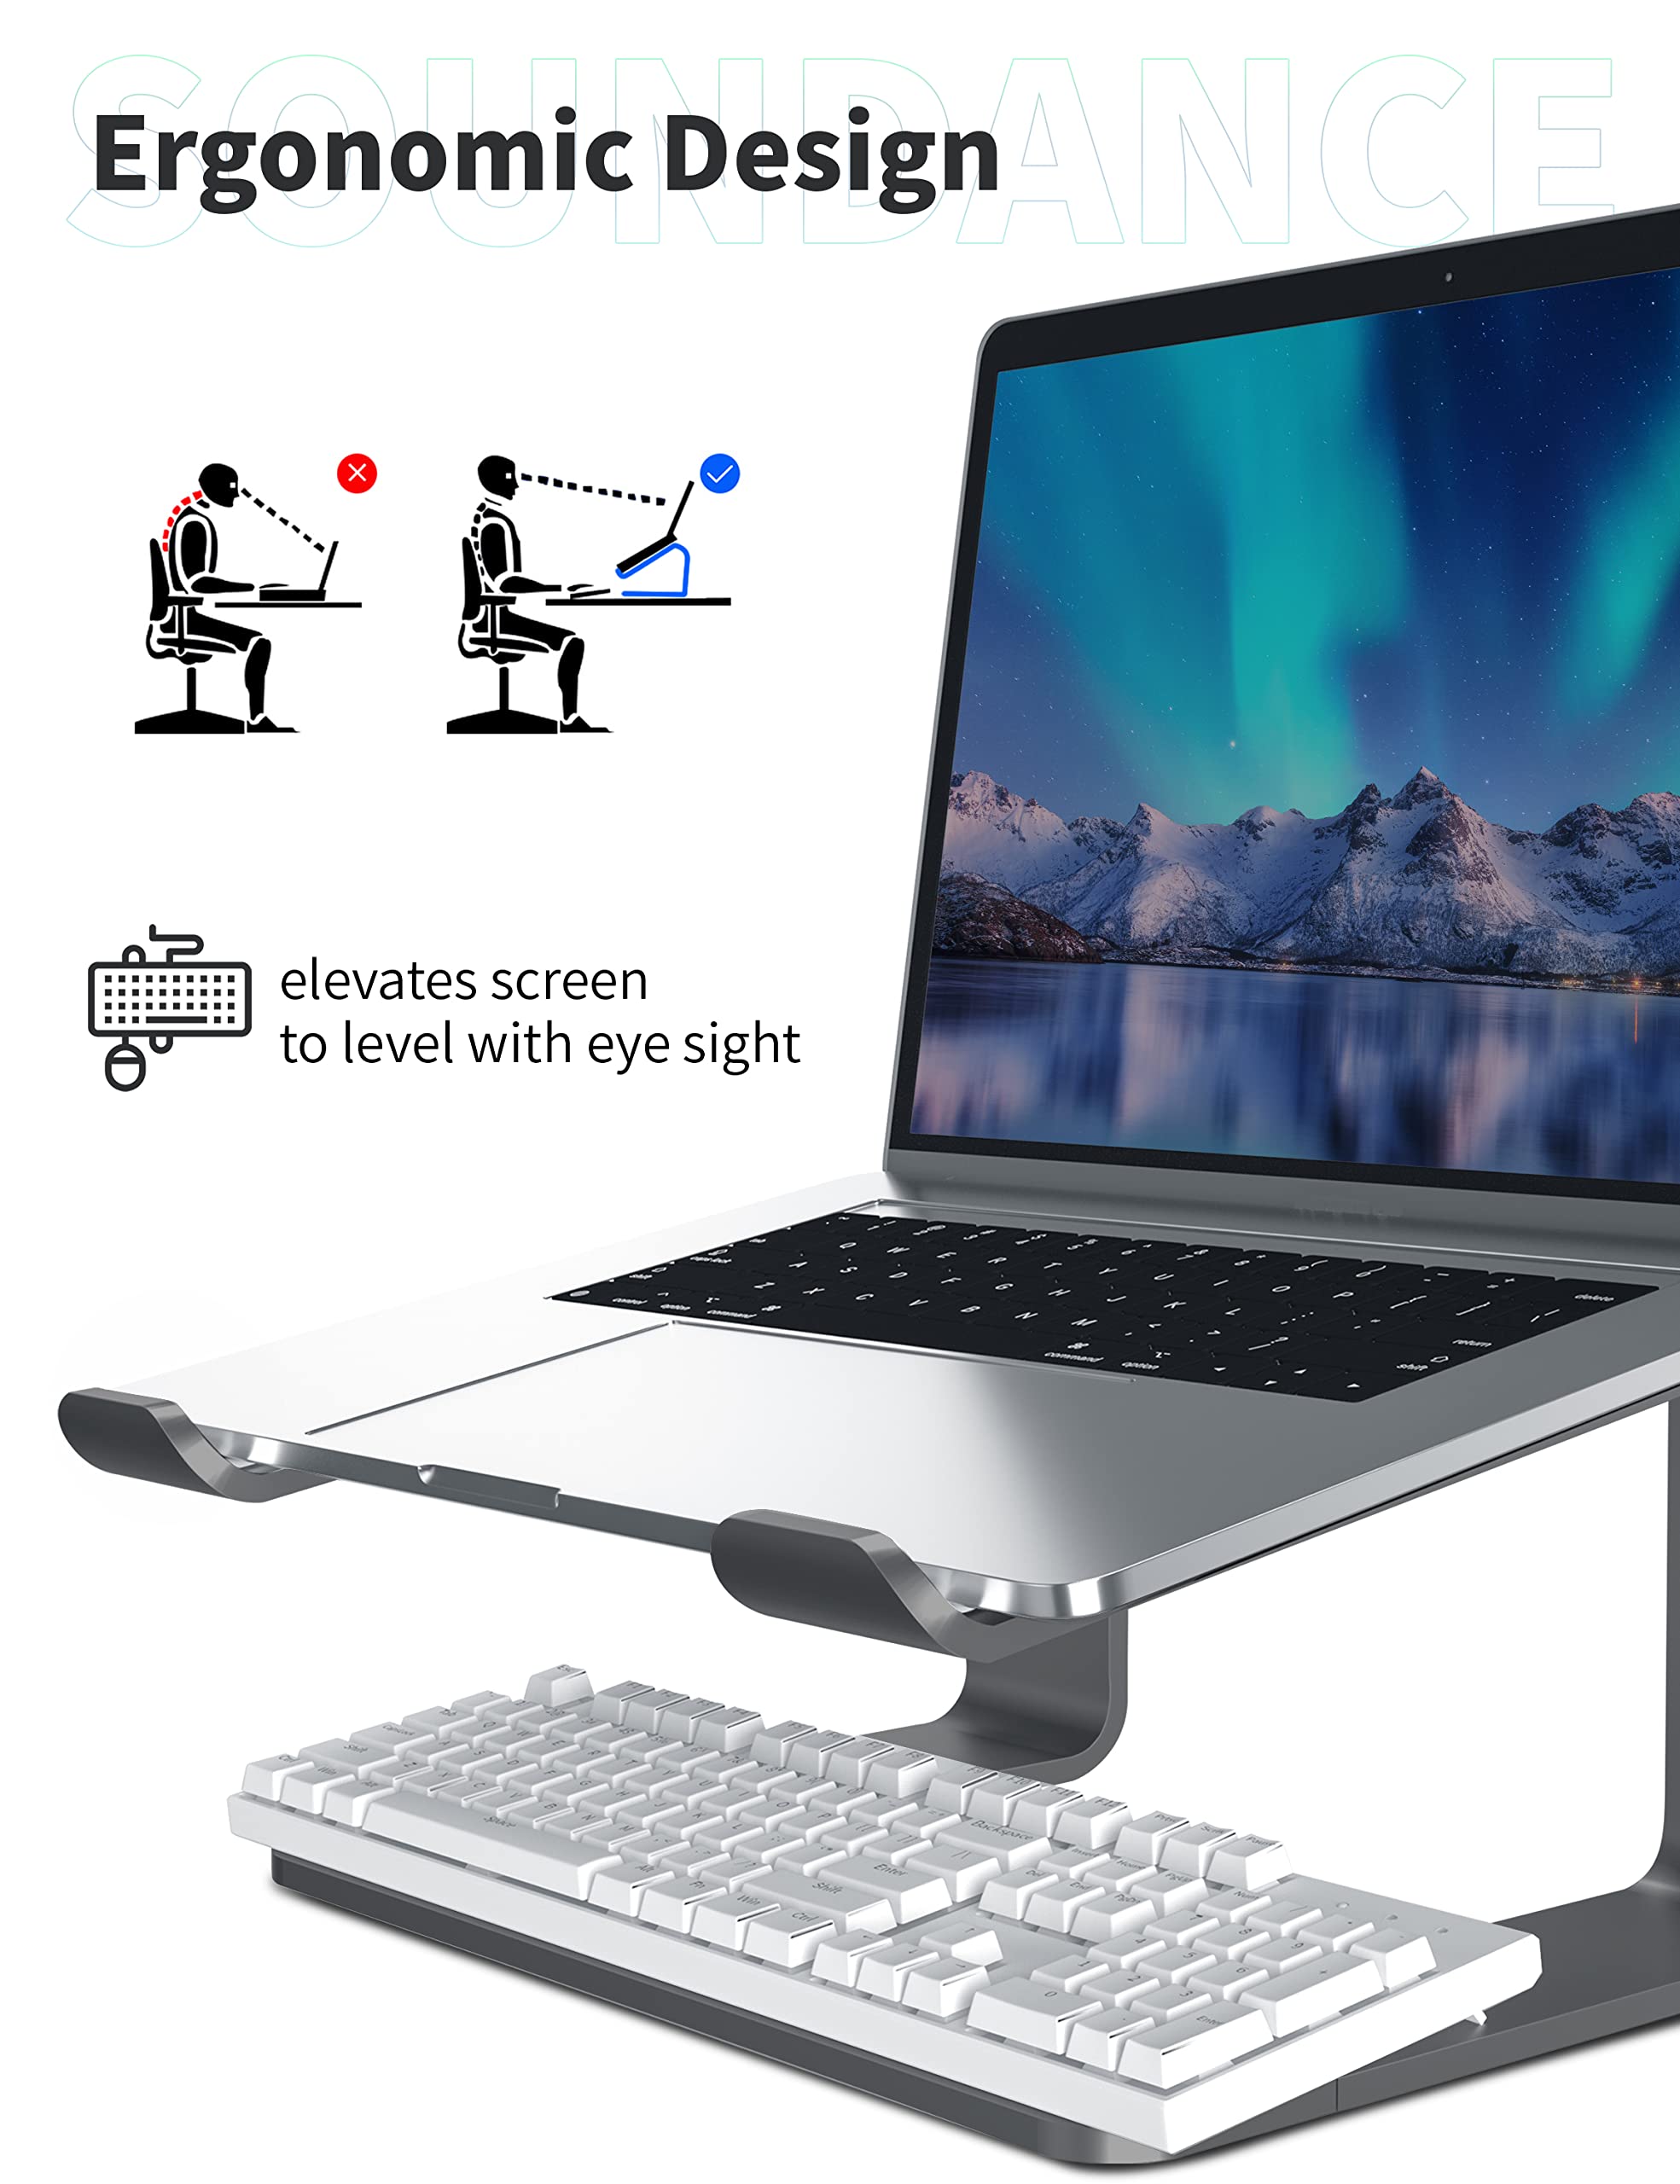 SOUNDANCE Laptop Stand, Aluminum Computer Riser, Ergonomic Laptops Elevator for Desk, Metal Holder Compatible with 10 to 15.6 Inches Notebook Computer, Grey